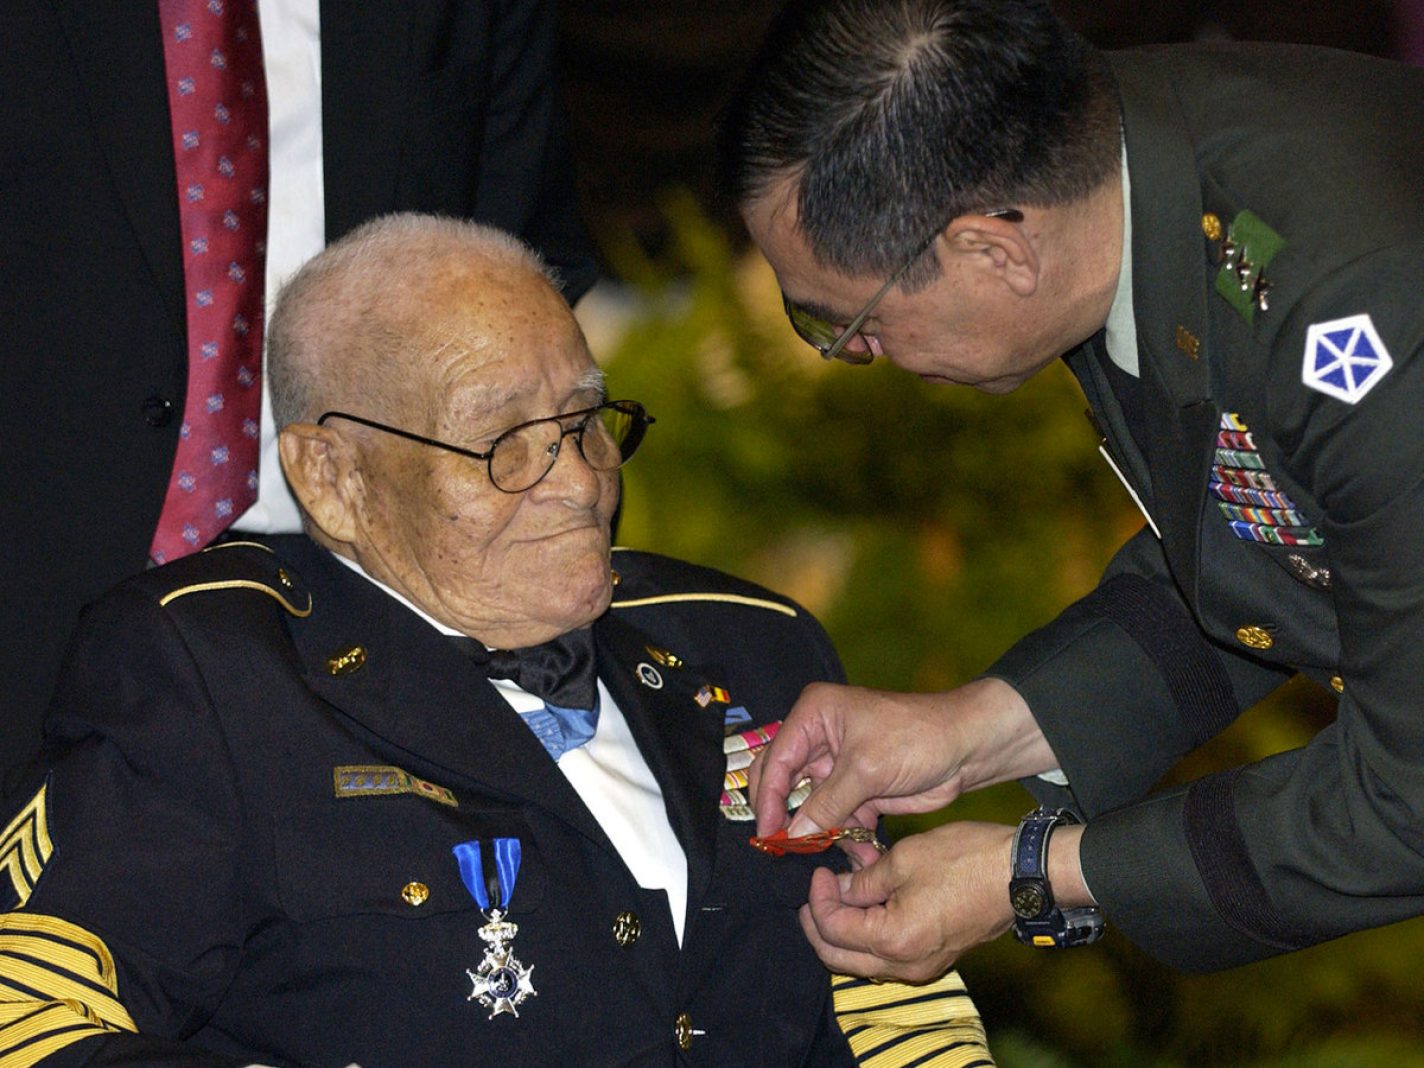 do medal of honor recepents receive any money?